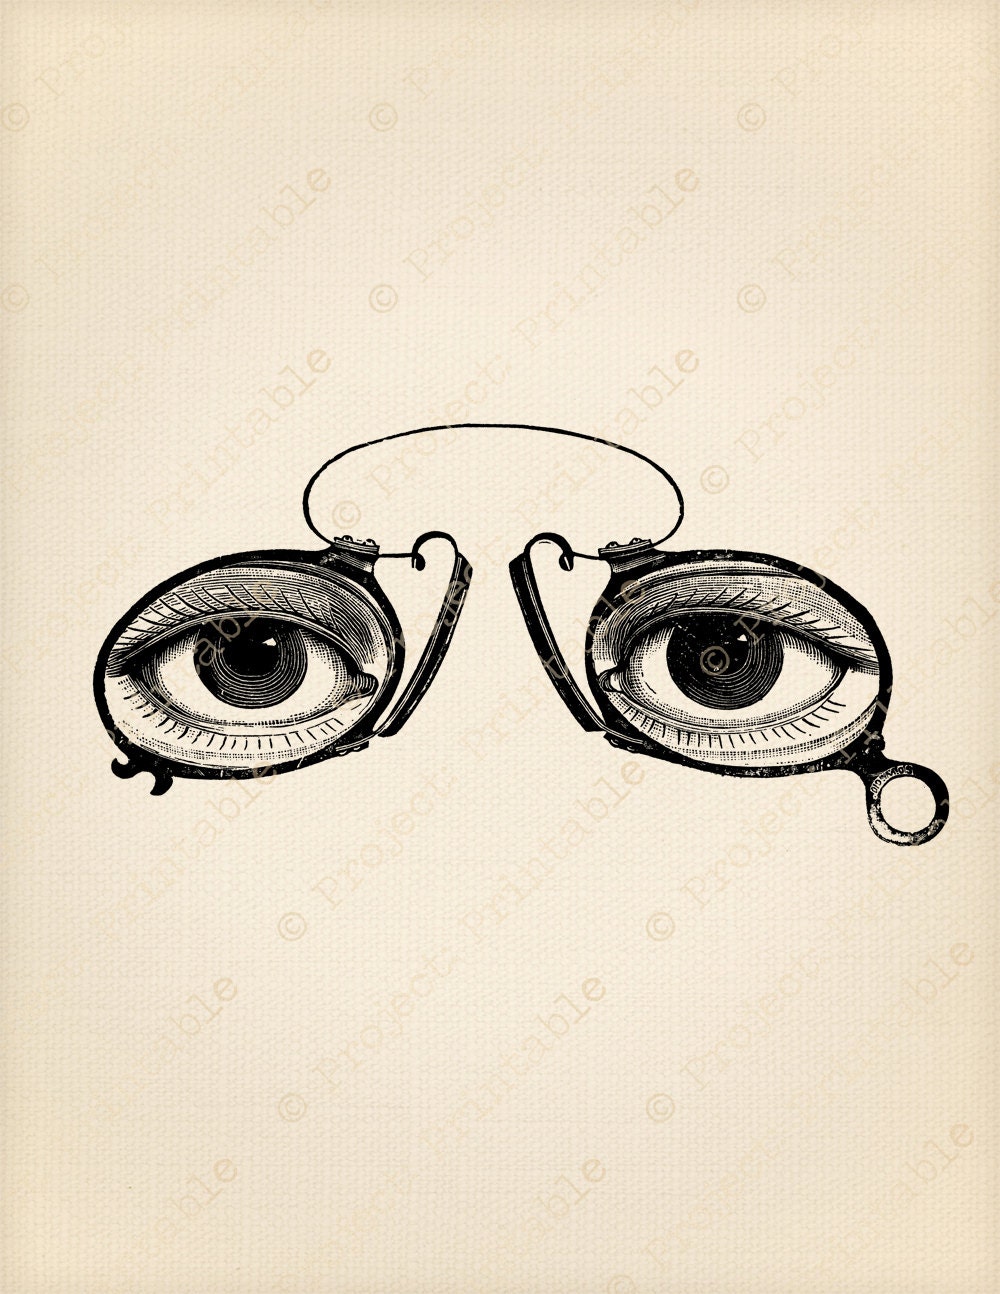 Instant Download Printable - Vintage Eyes Glasses Spectacles - Steampunk Graphics Clip Art - Digital Fabric Transfer Image - iron on clipart steampunk buy now online